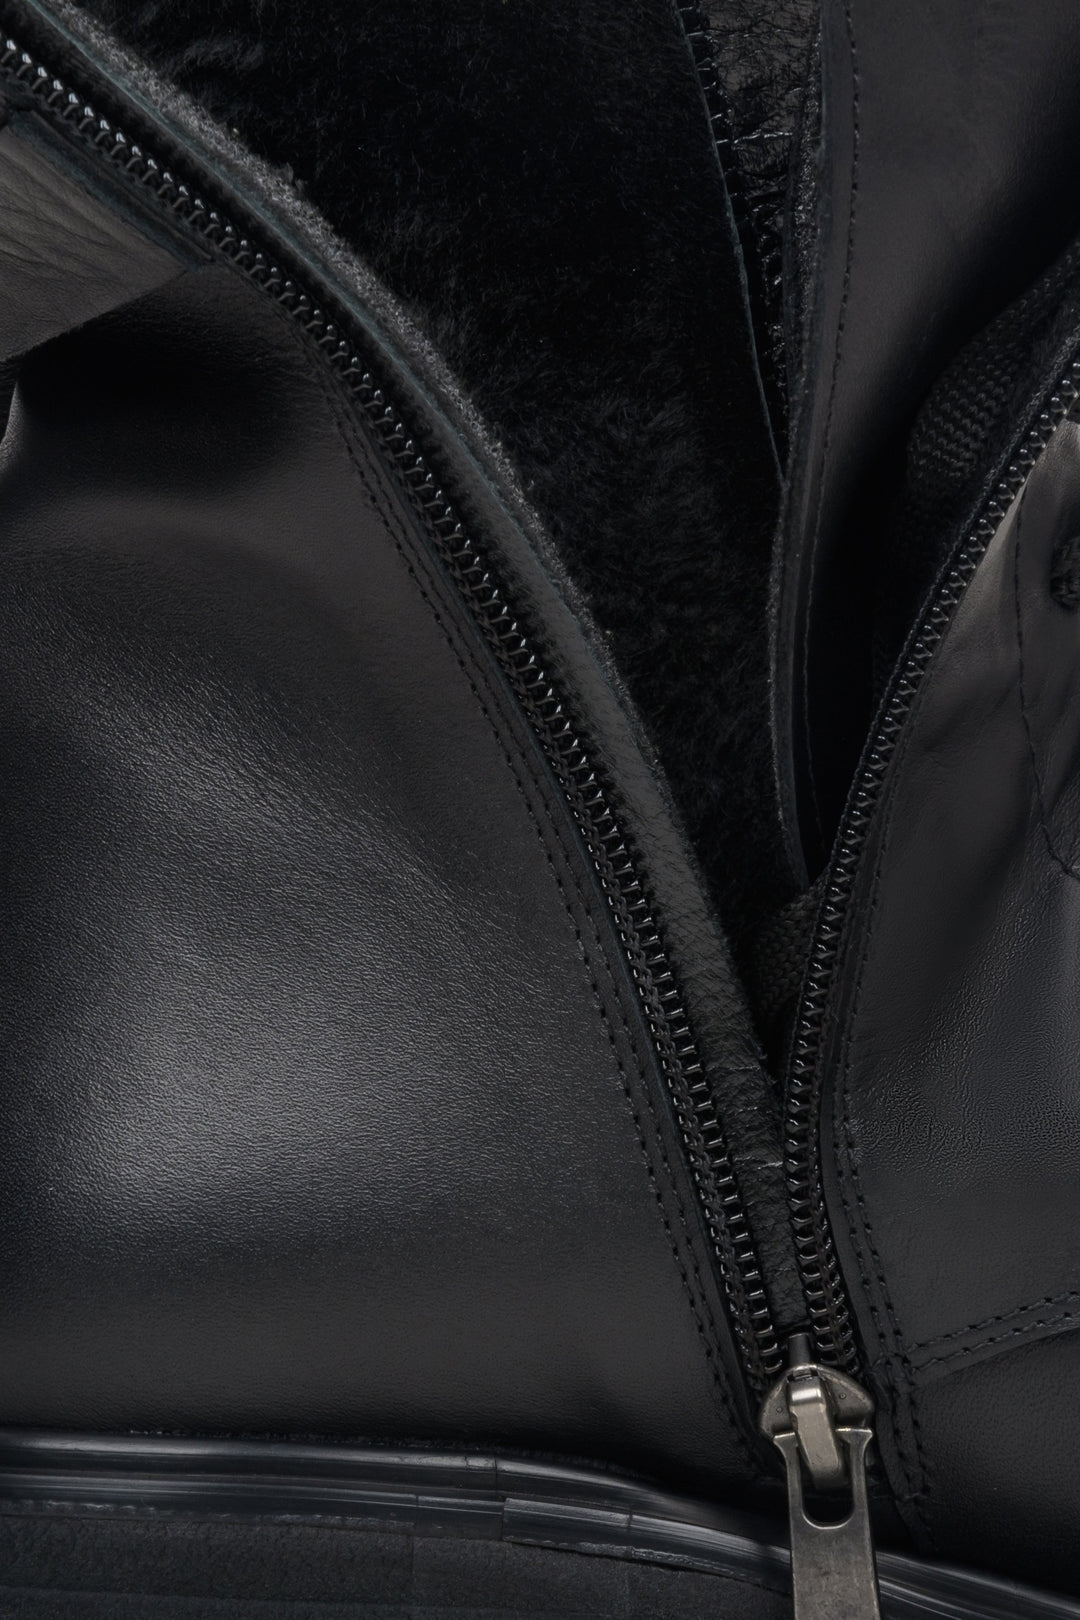 Women's black leather boots by Estro - close-up on the interior.